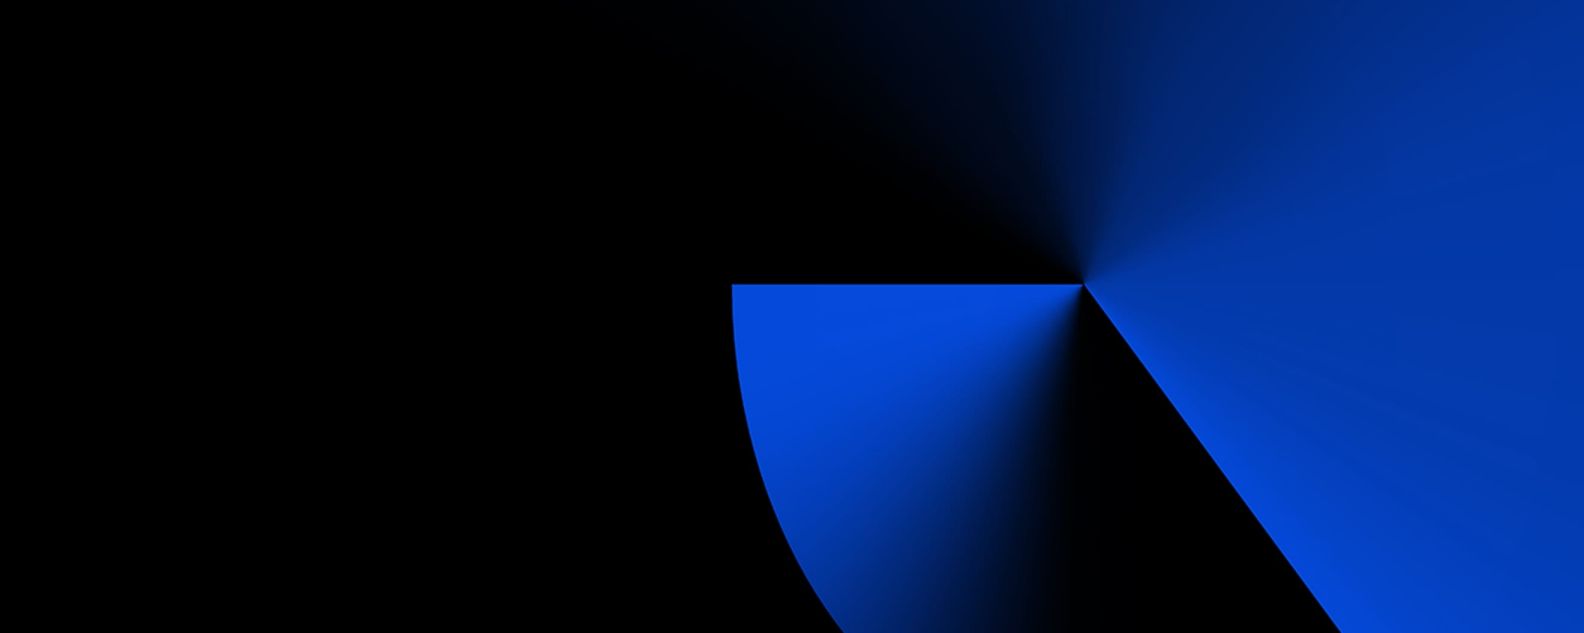 Geometric  blue forms in a black background